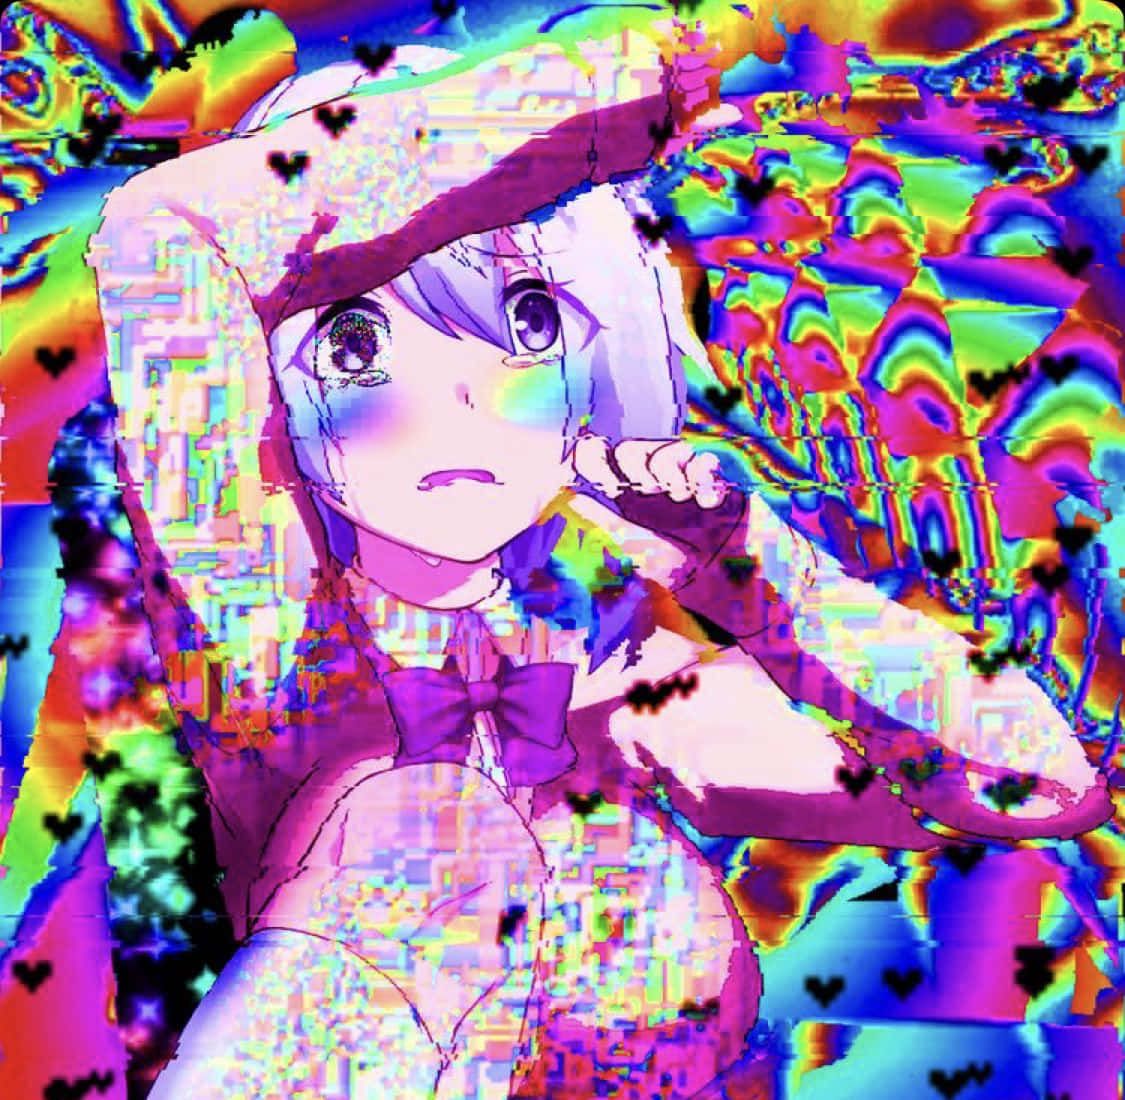 Anime girl in colorful psychedelic background - Animecore